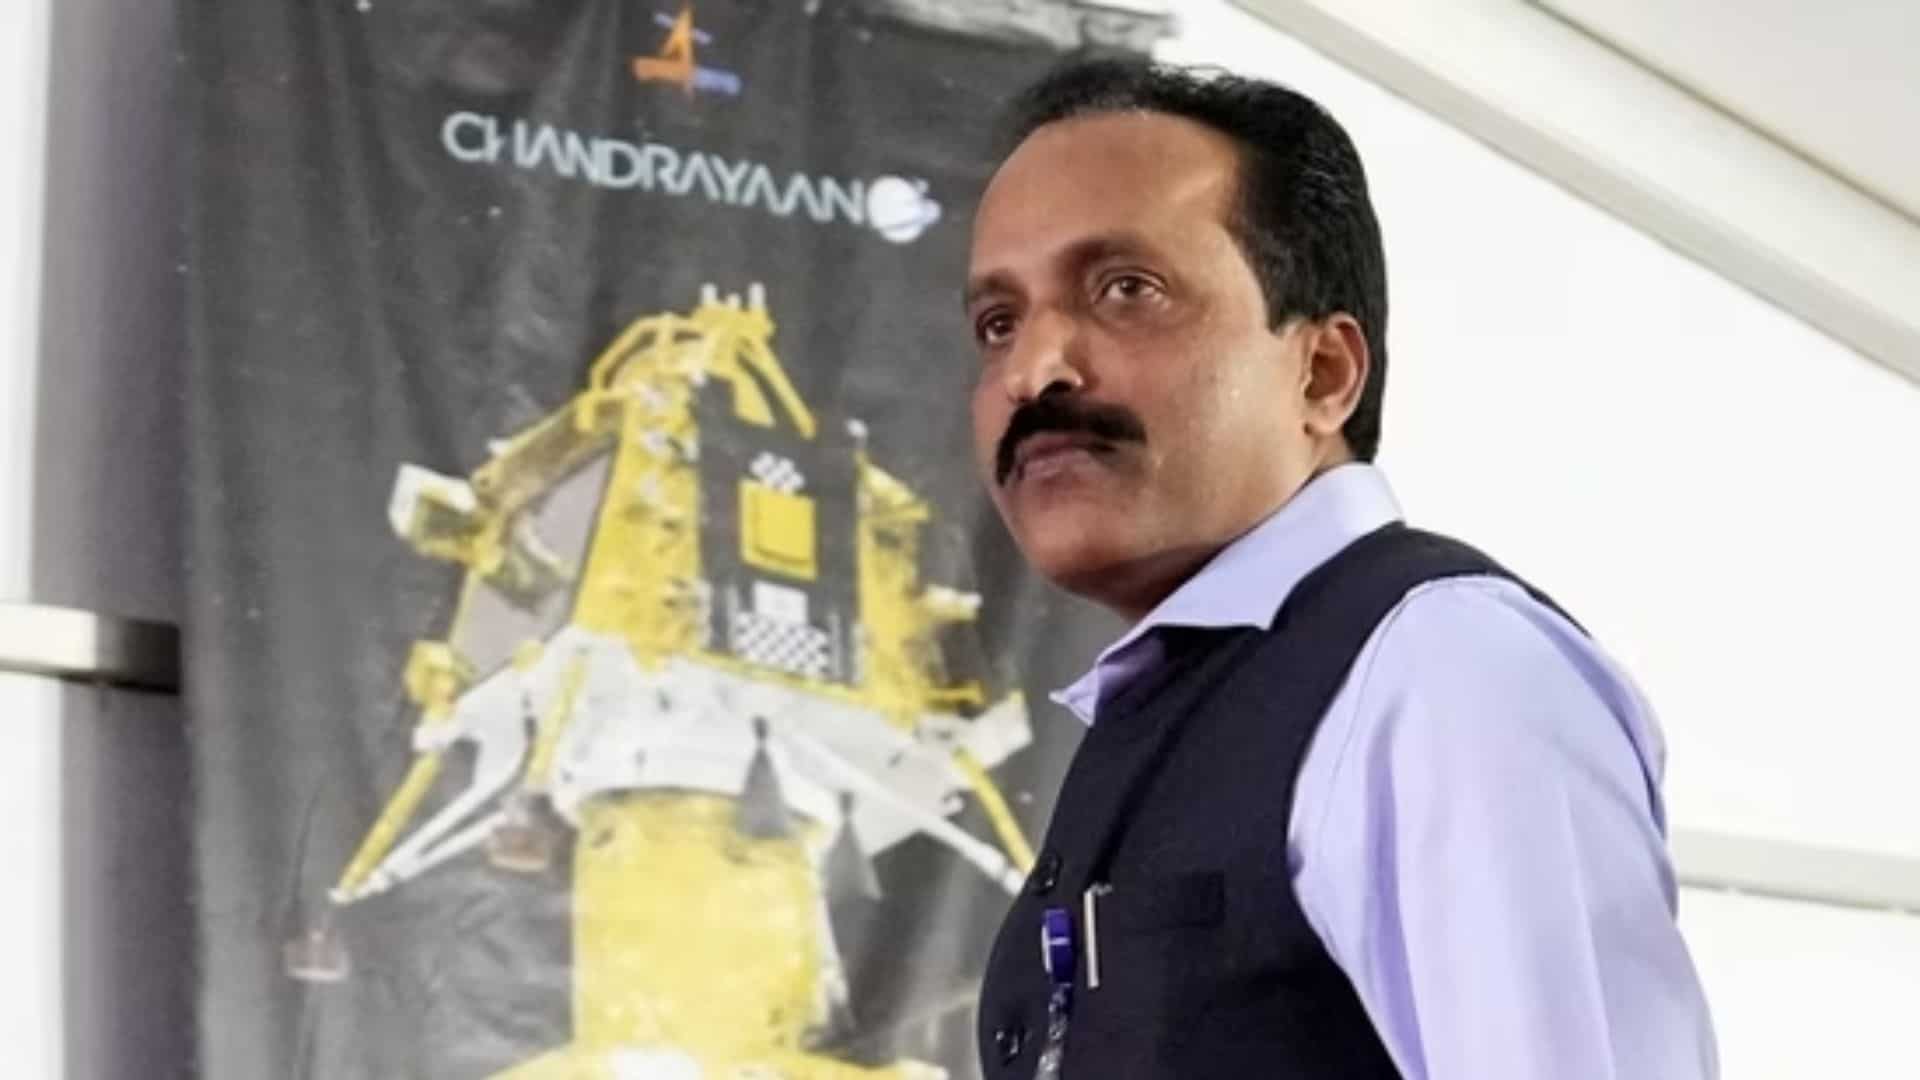 ISRO Chief S Somanath withdraws autobiography newsletter amid controversy over Chandrayaan-2 picture